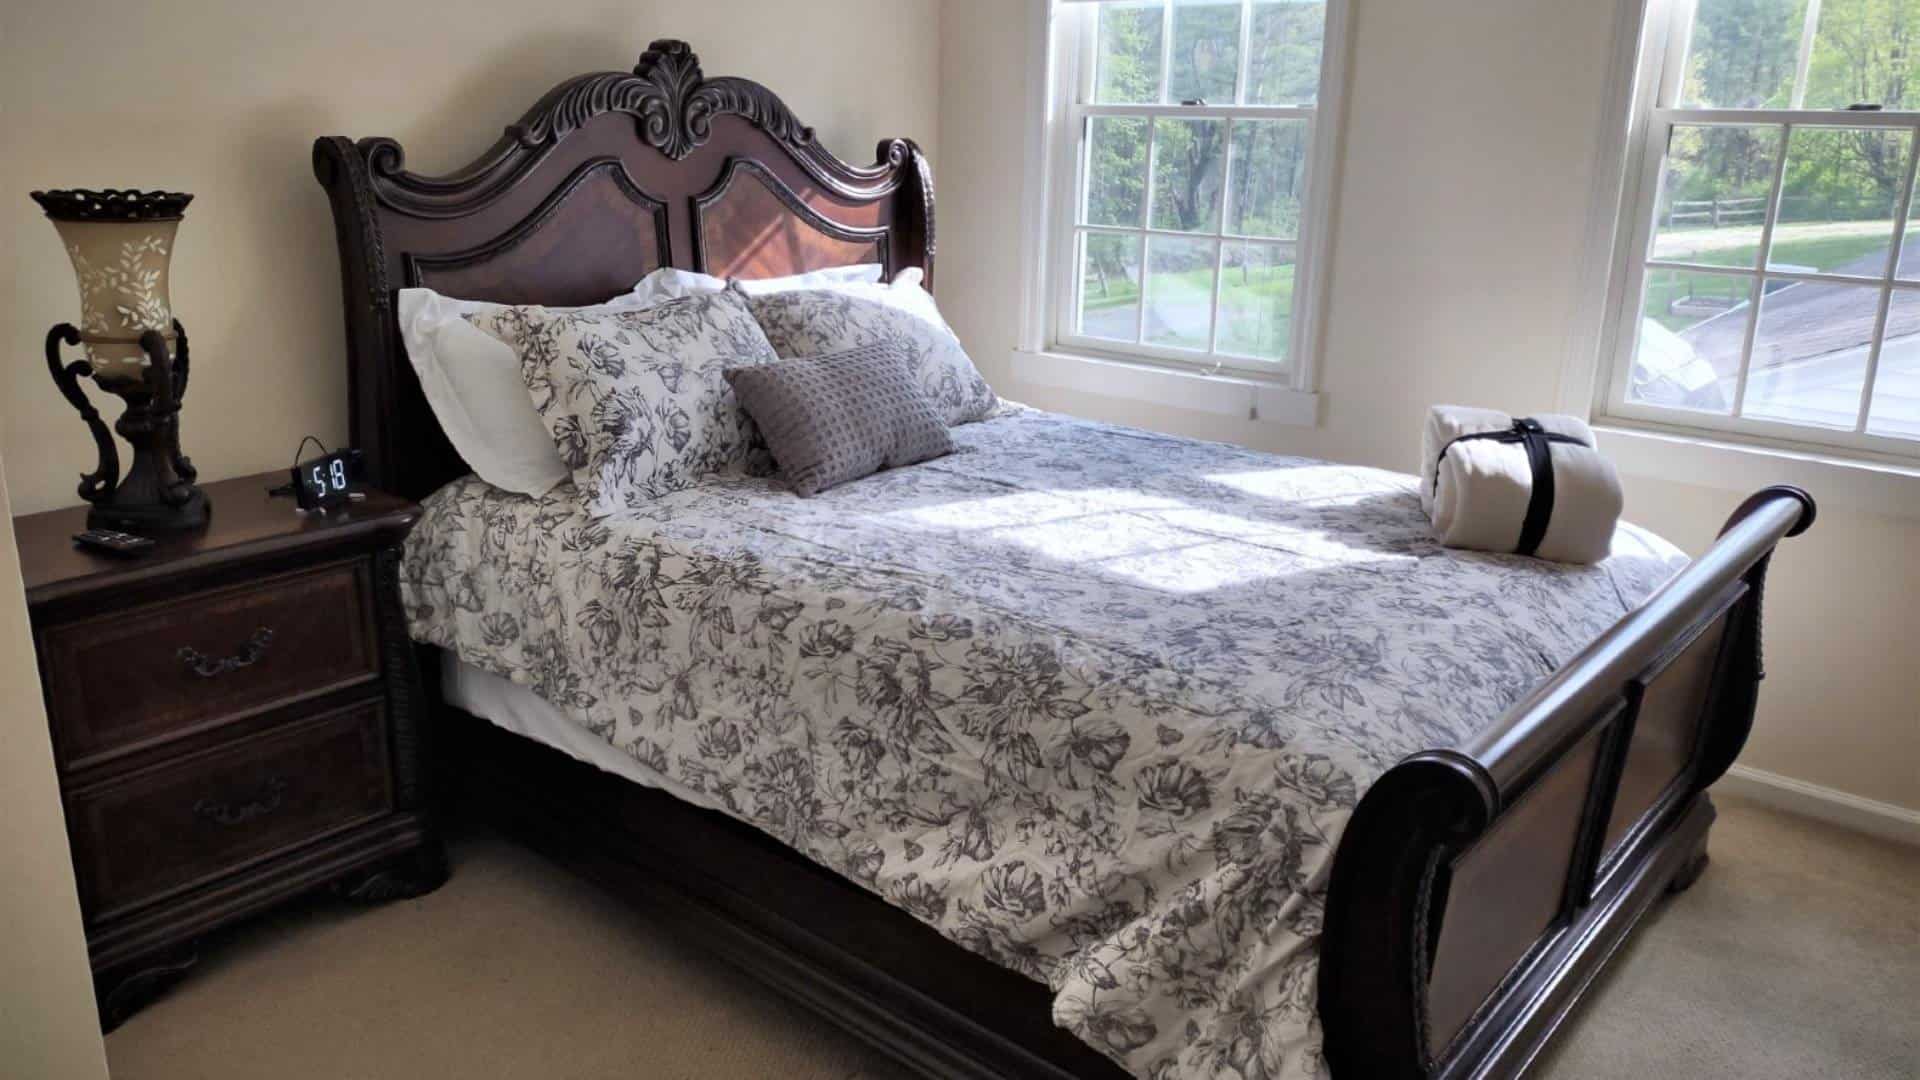 Bedroom with light colored walls and carpetting, dark wooden sleigh bed, floral bedding, wooden dresser, and windows